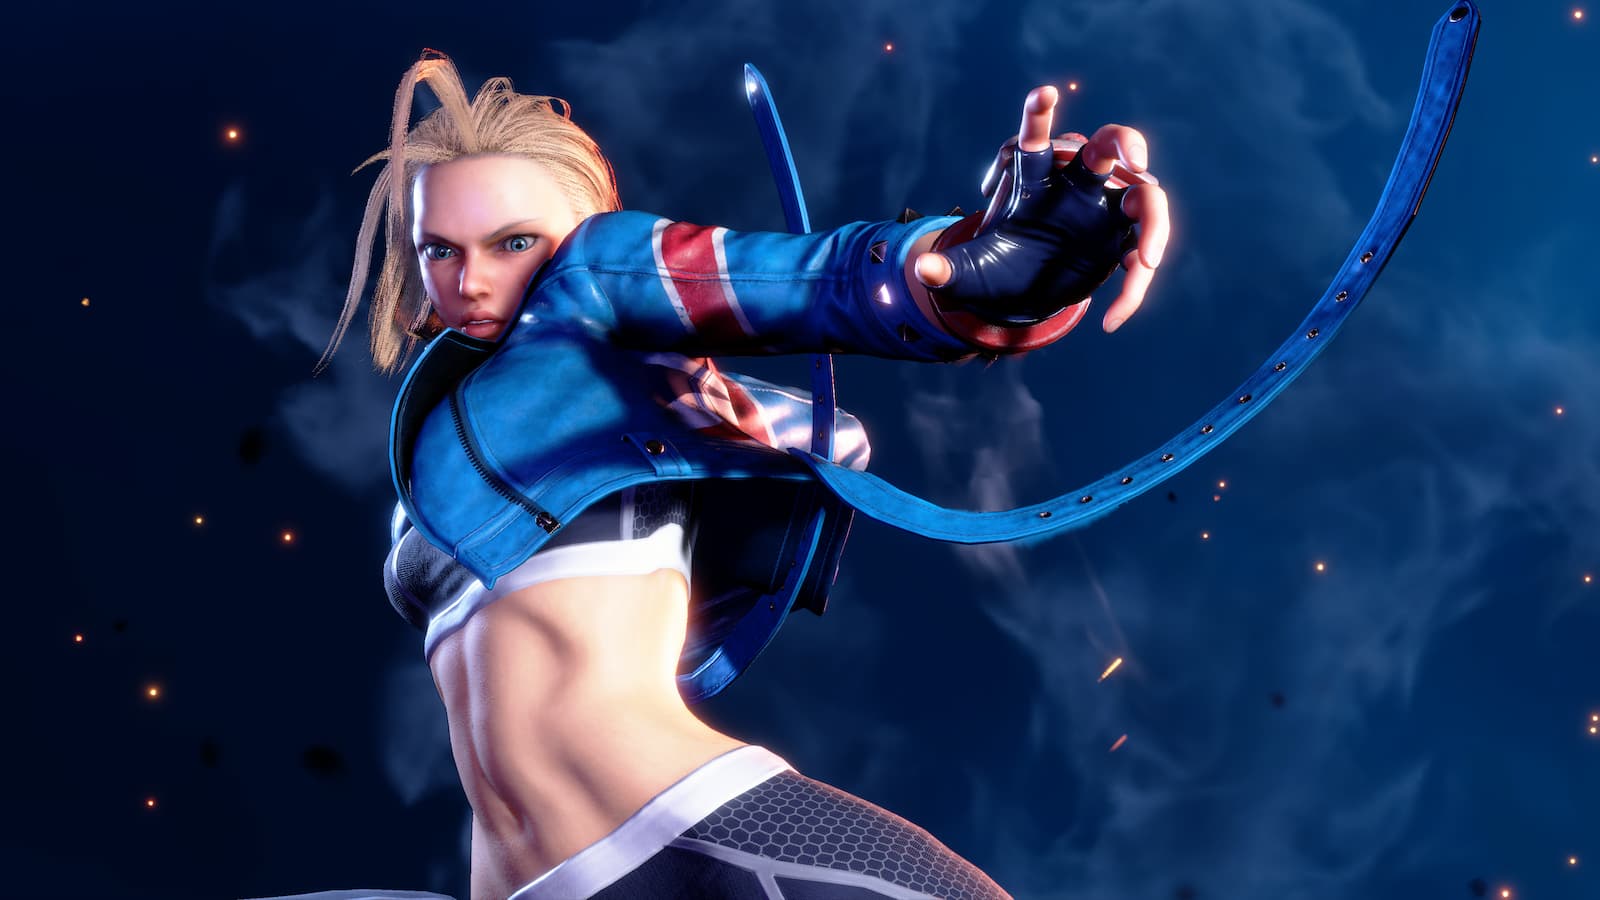 21 Facts About Cammy (Street Fighter) 